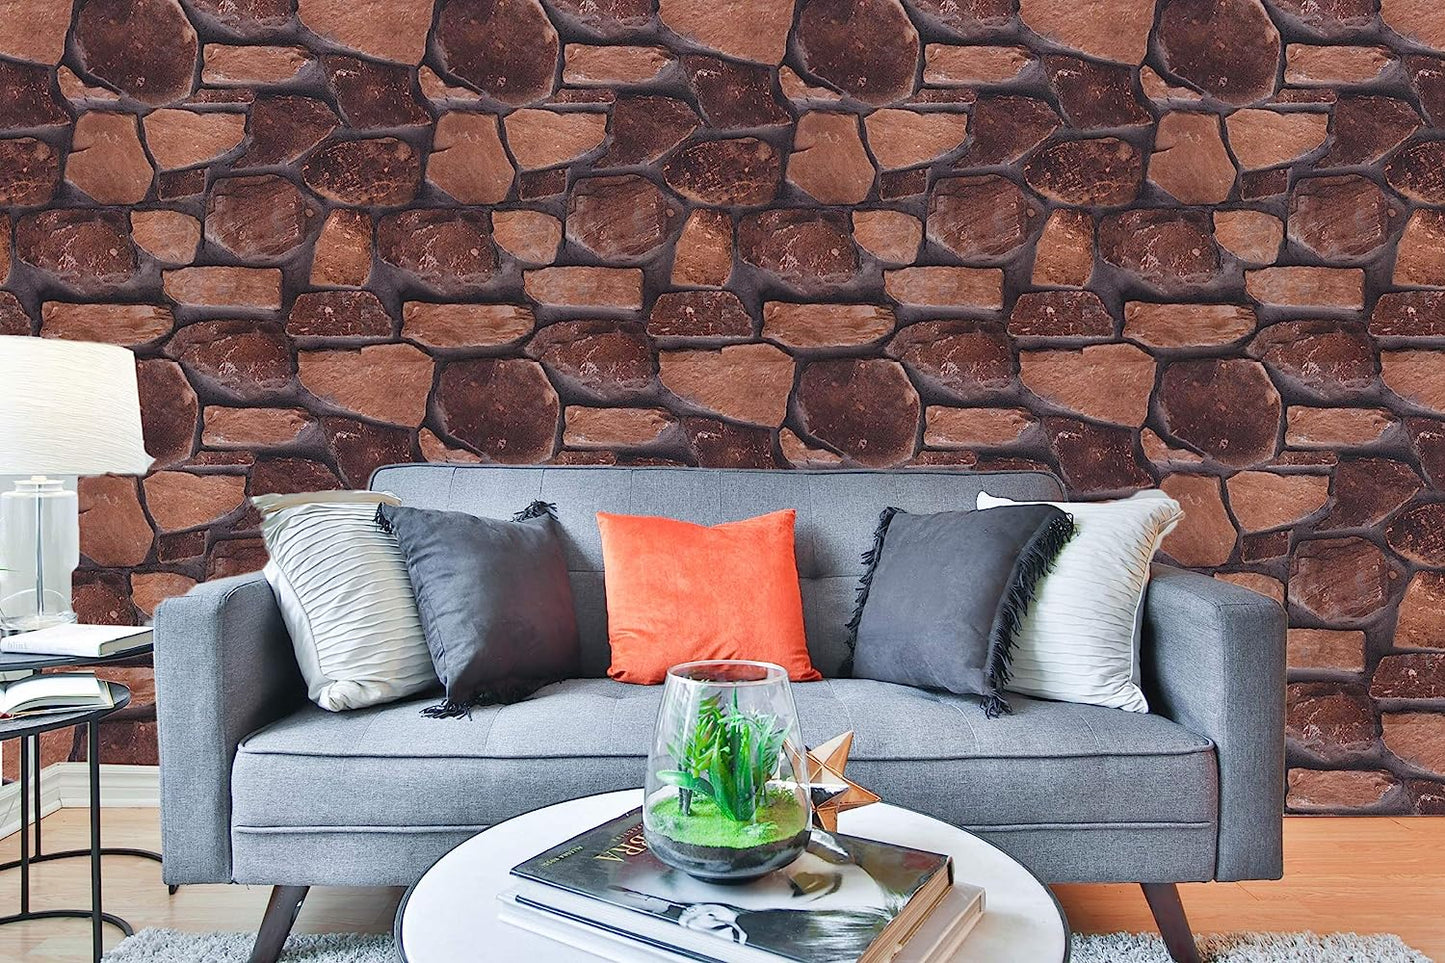 3D Latest Stone Design Dark Brown Wallpaper Roll for Home Walls 57 Sq Ft (0.53m or 33 Feet)